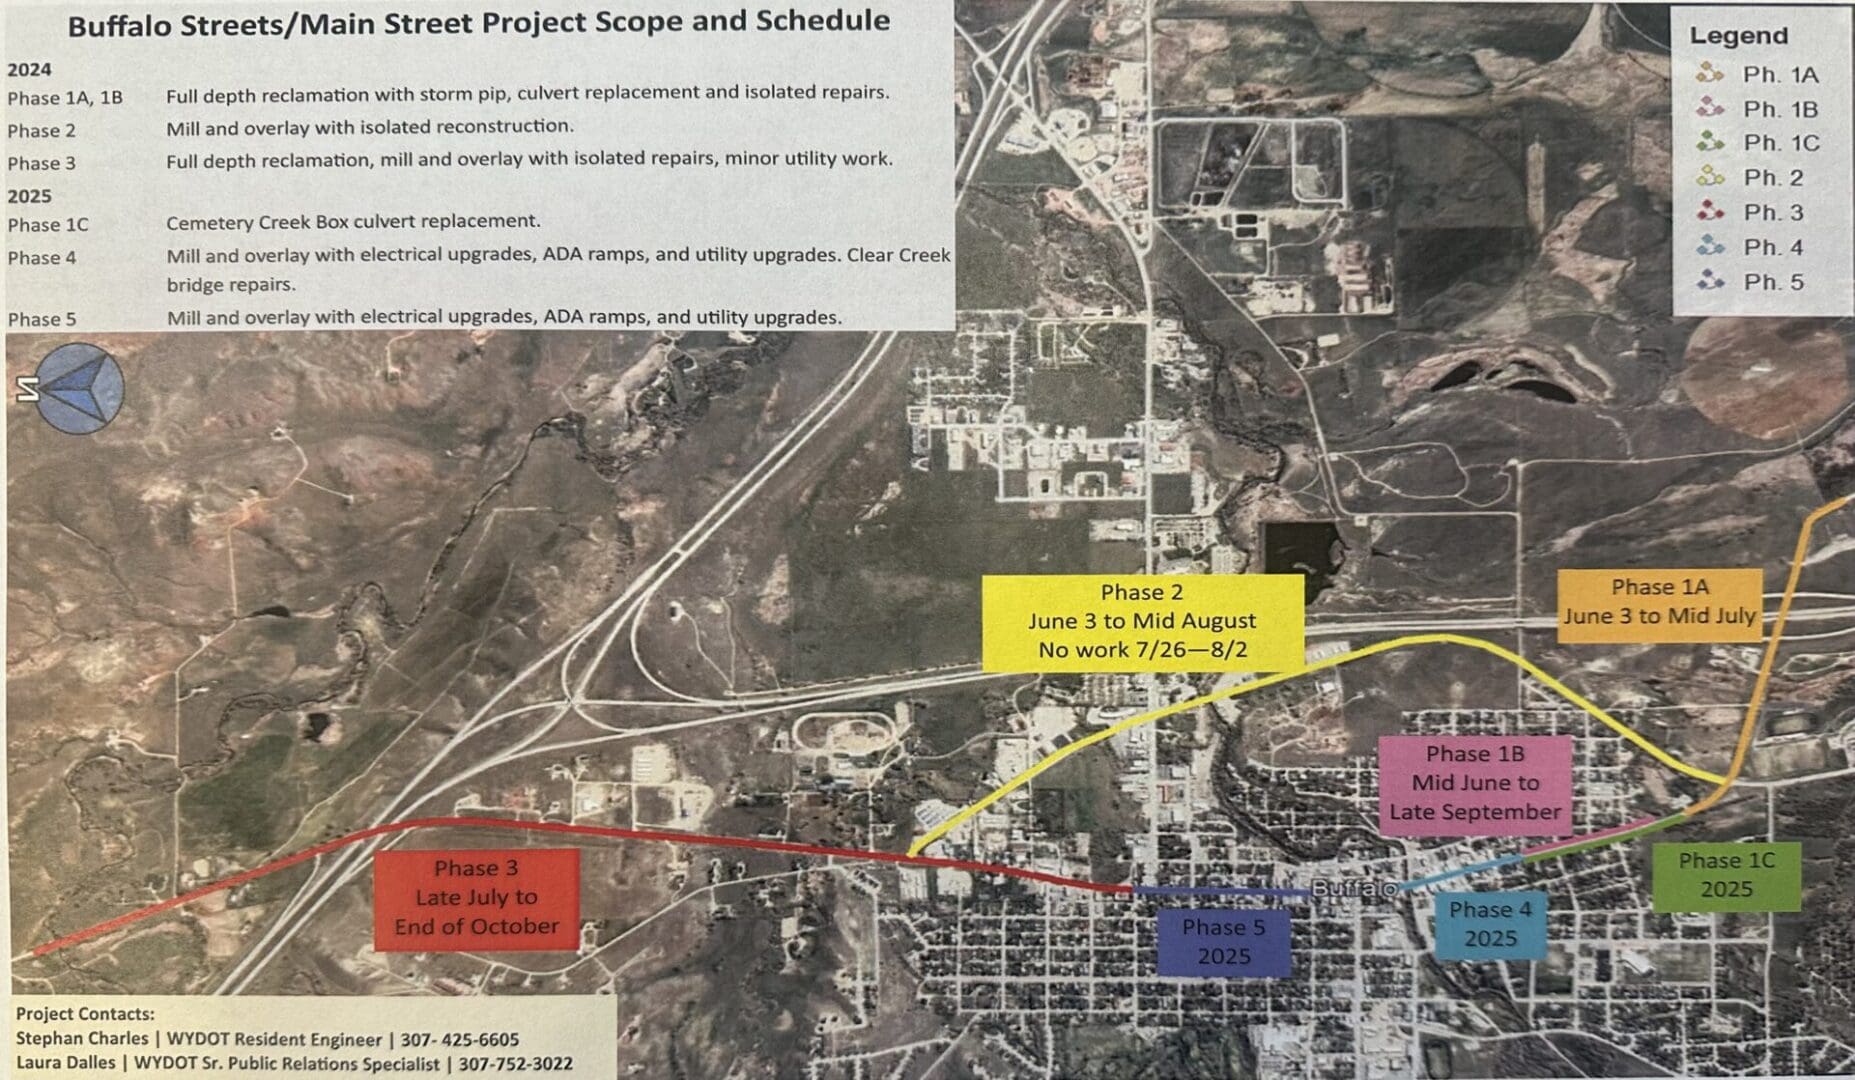 A map of the Buffalo Streets project scope and schedule.